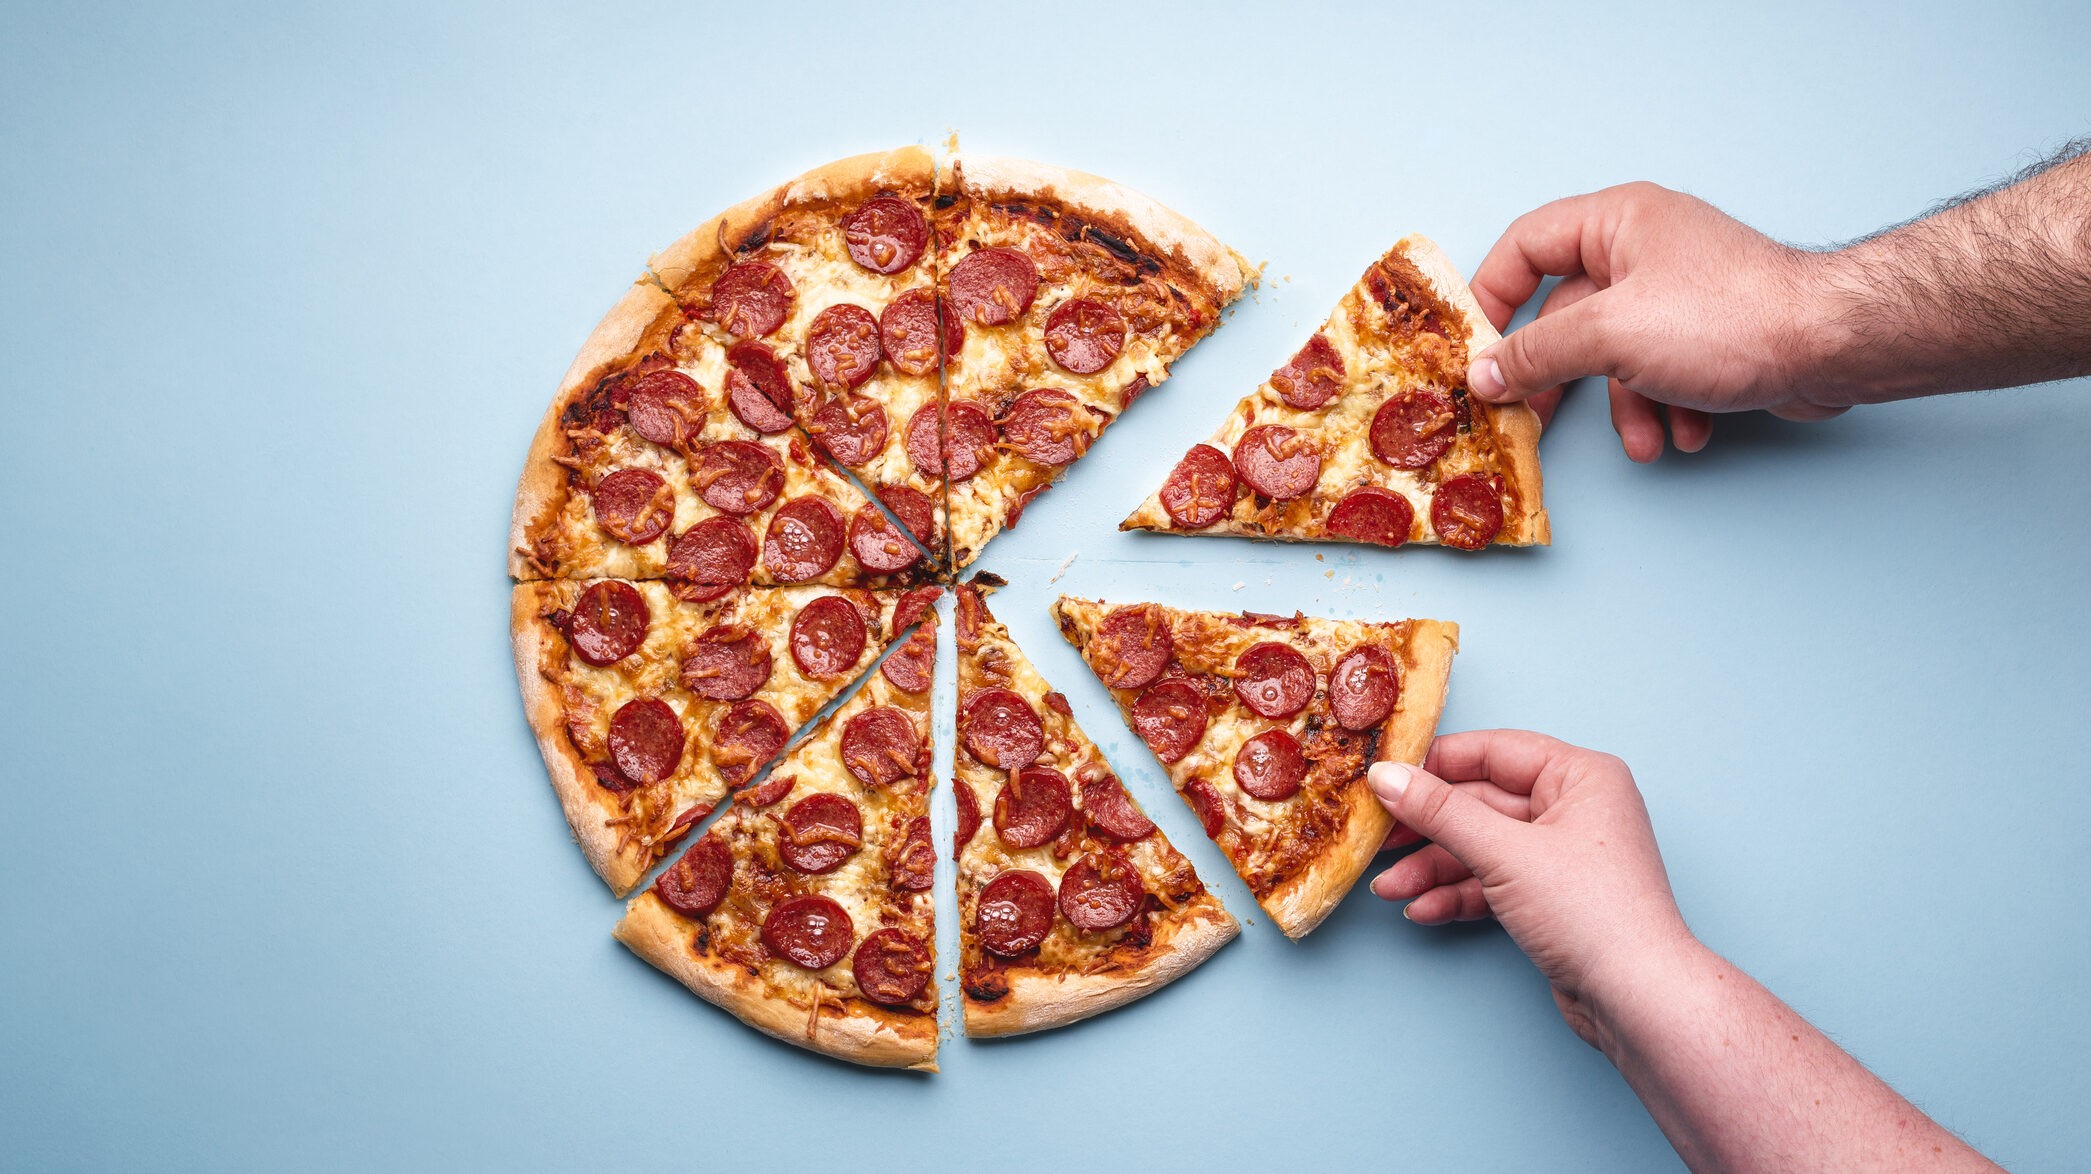 Slizes of pizza in Mr. Gatti's Pizza Franchise, is a America’s favorite comfort food with the pizza franchise business and popular pizza franchise.